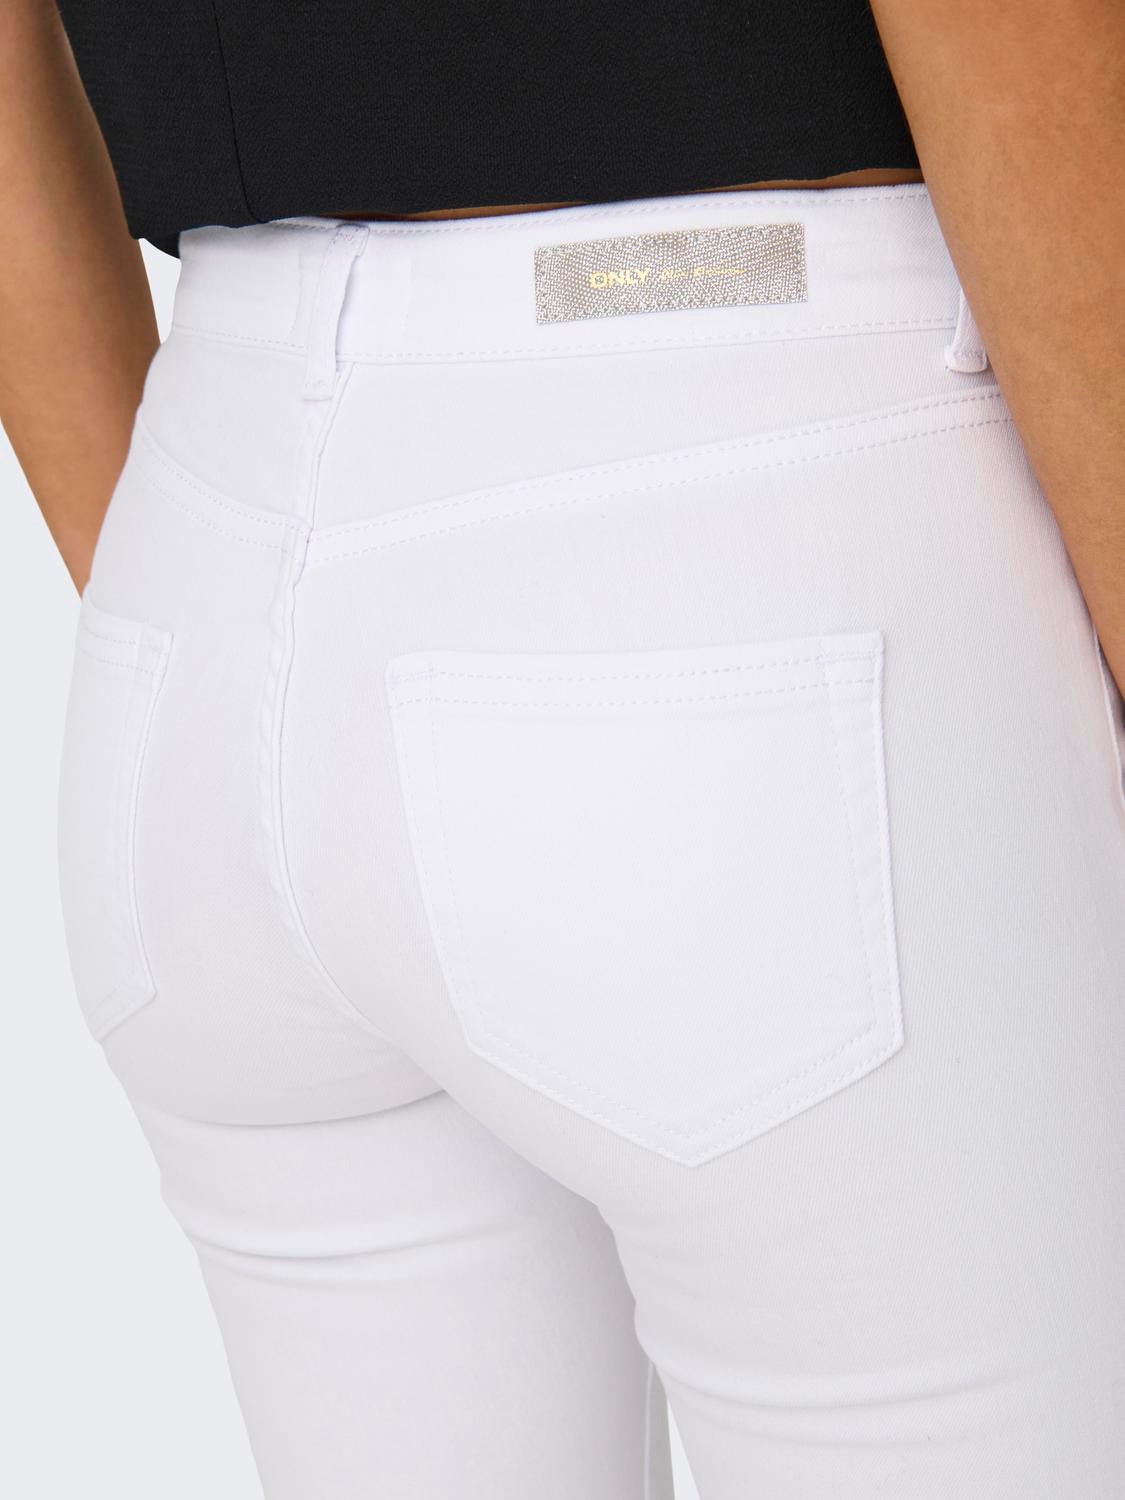 ONLY Skinny Fit Mid waist Jeans -White - 15329124